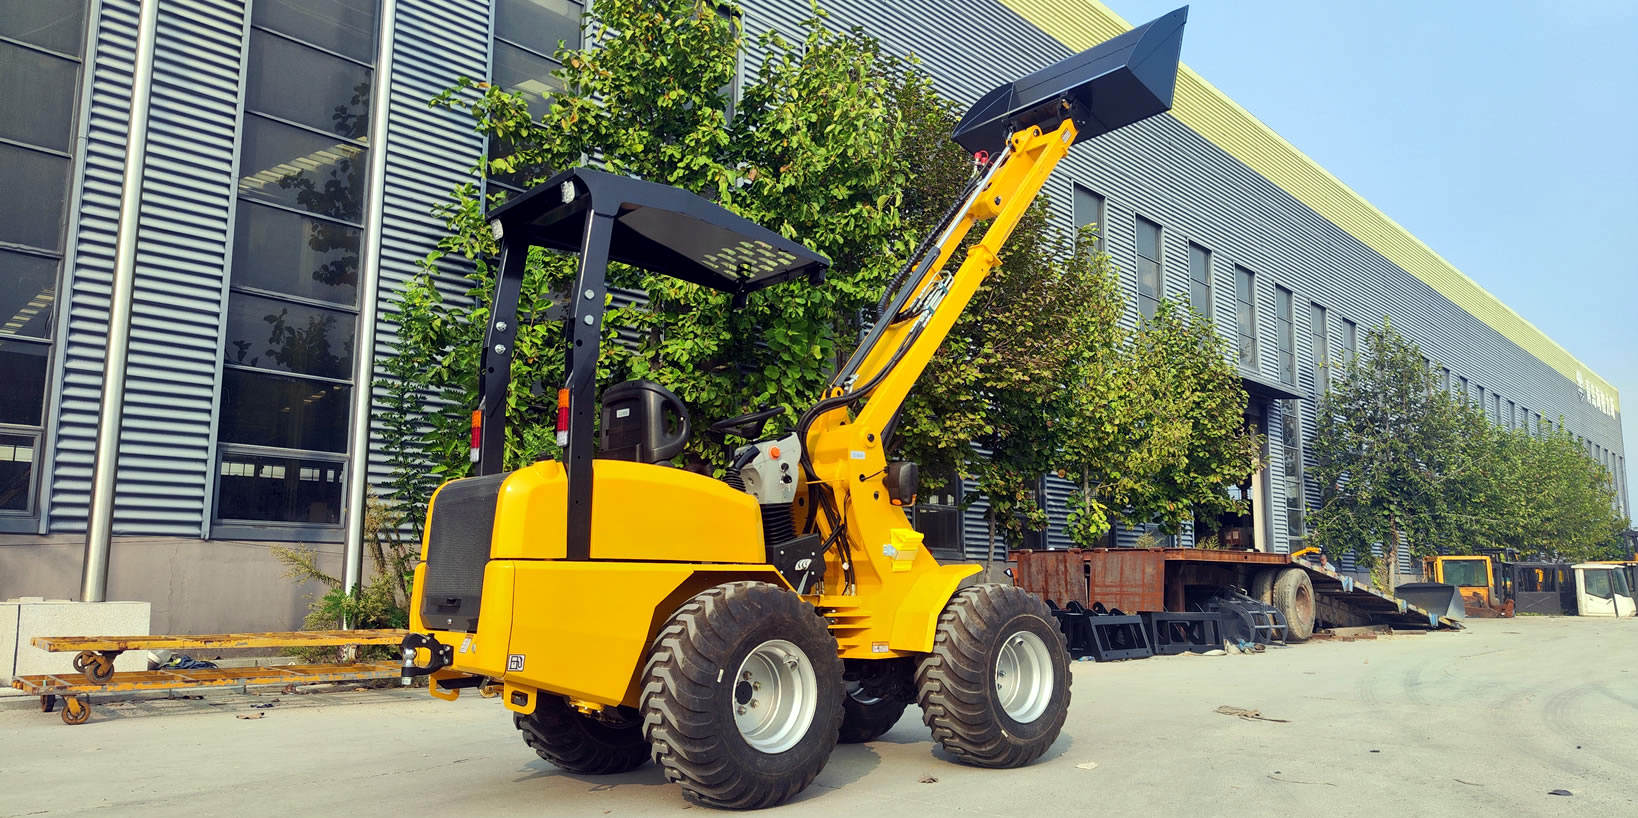 HT190 telescopic loader, Heracles, factory in China